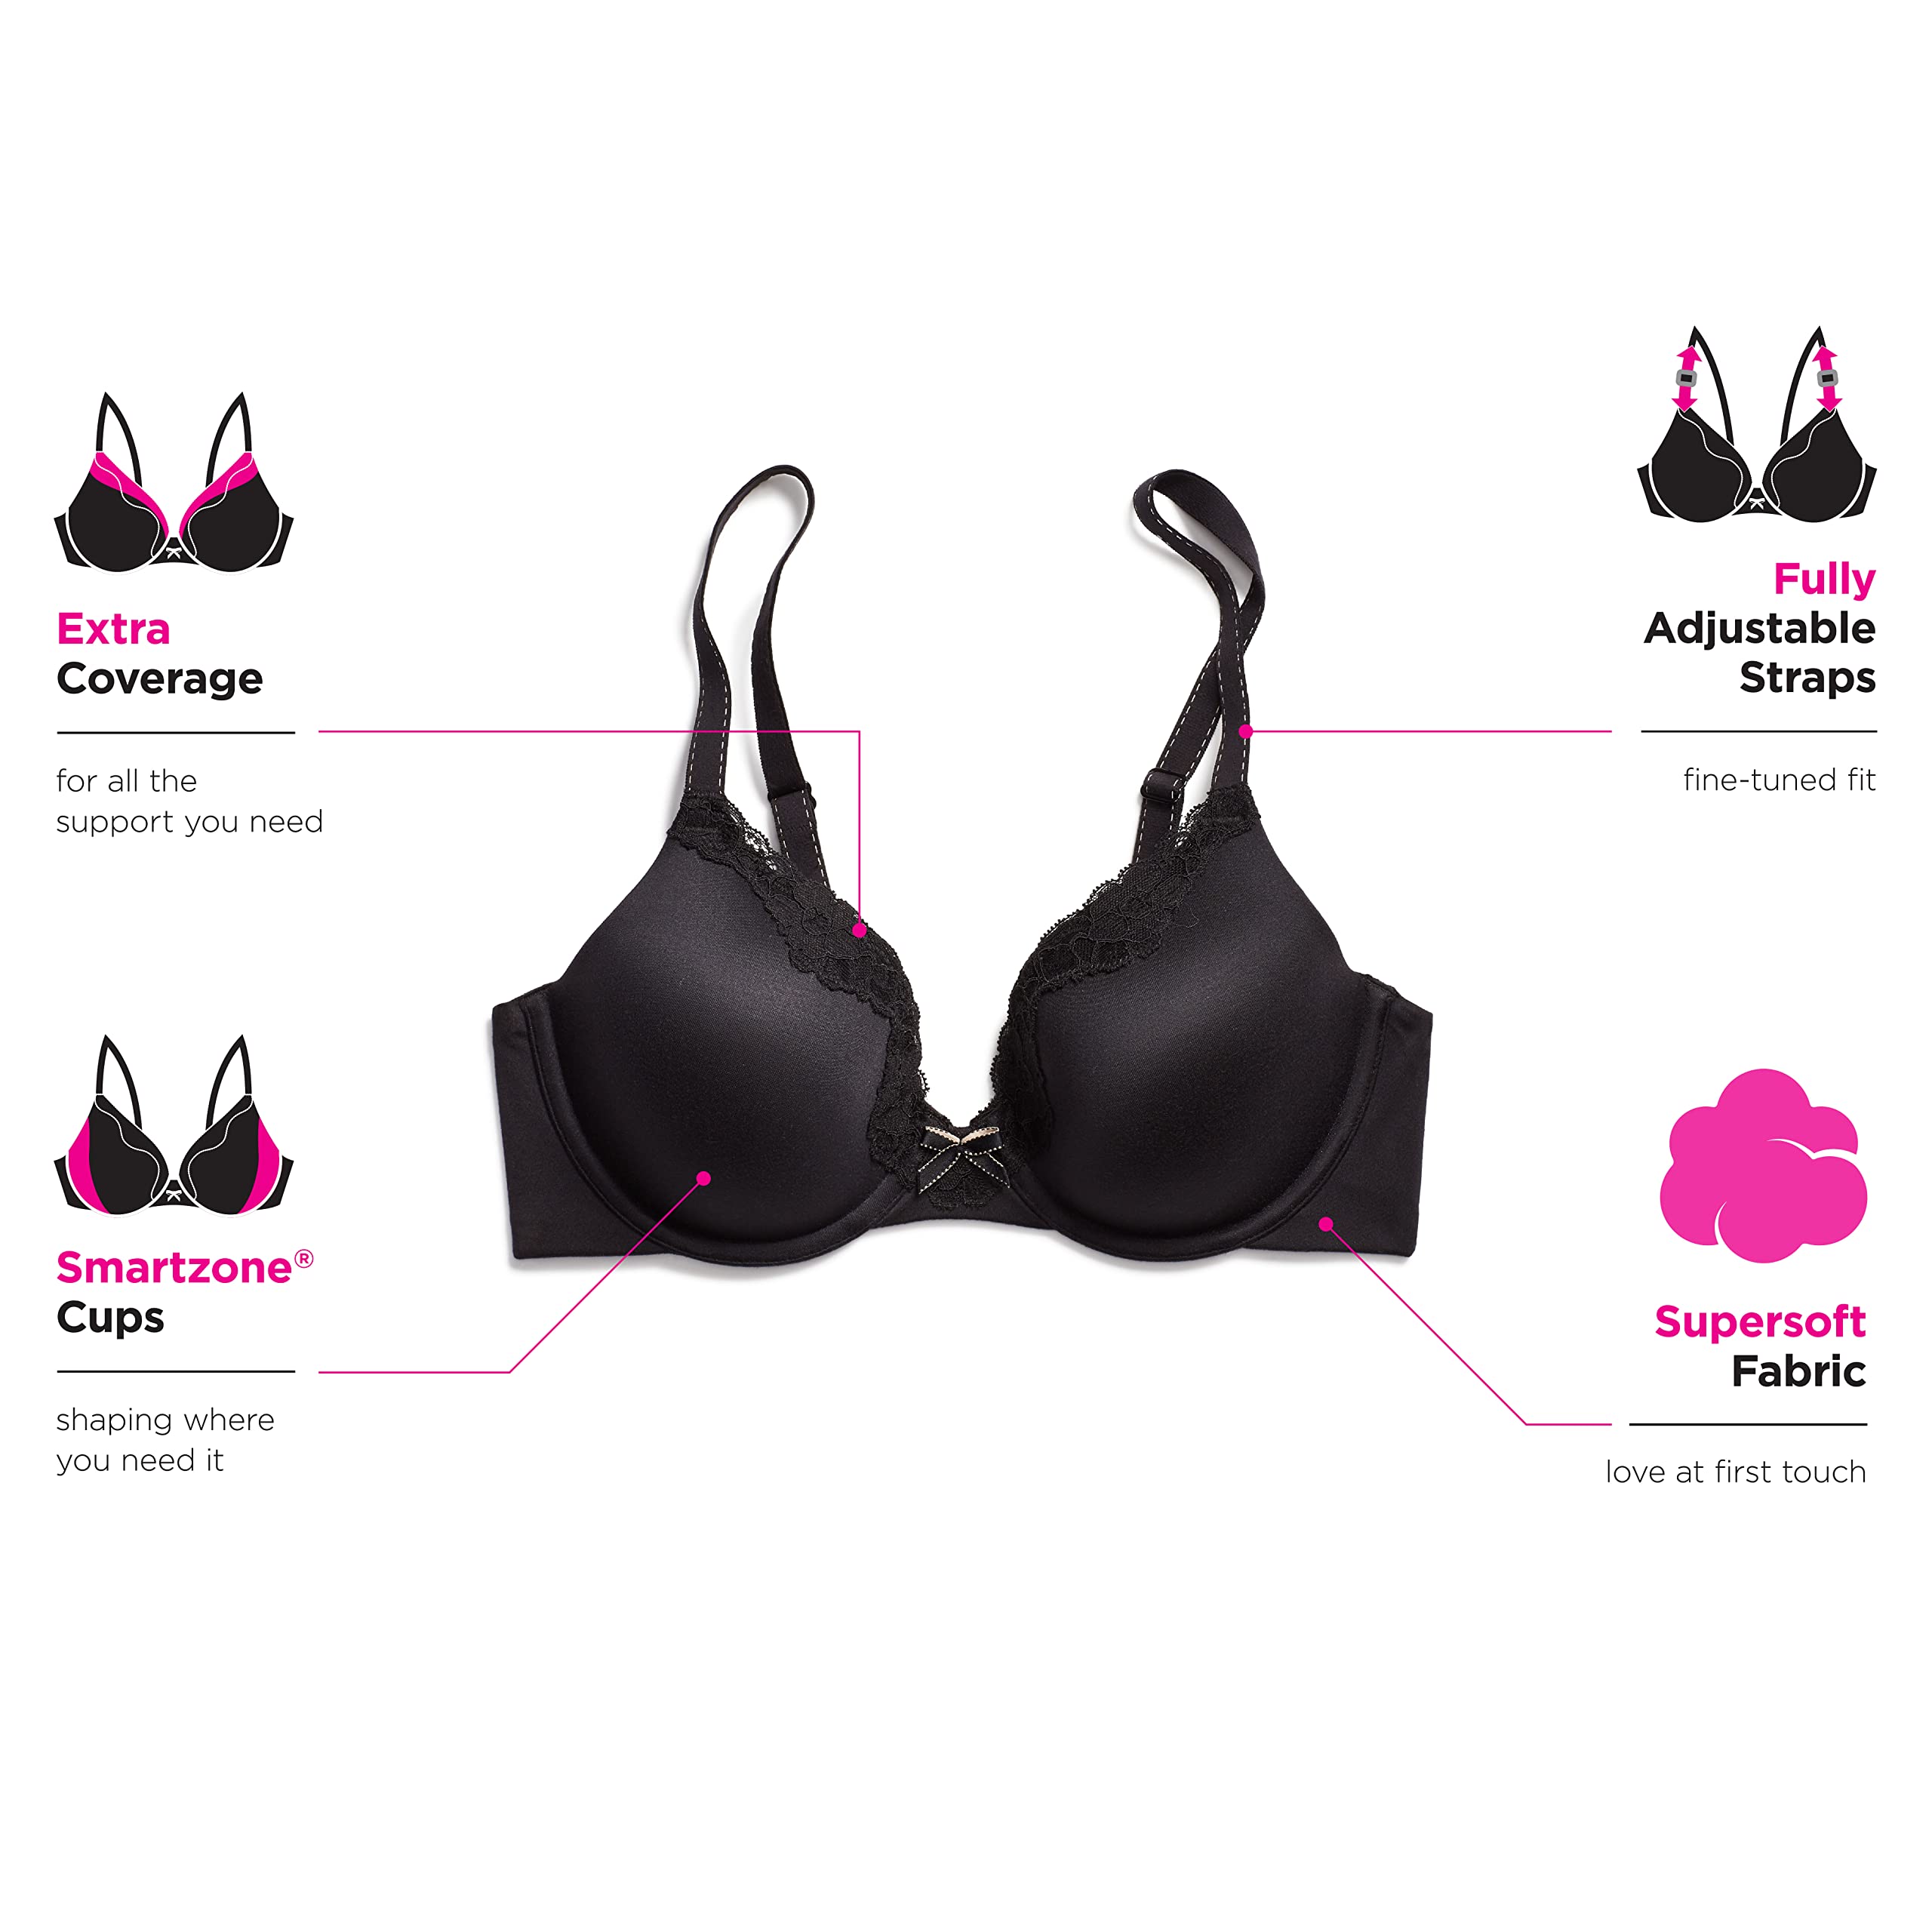 Maidenform Comfort Devotion Lace Bra, Smoothing Full-Coverage T-Shirt Bra for Everyday Comfort, Comfortable Lace Bra